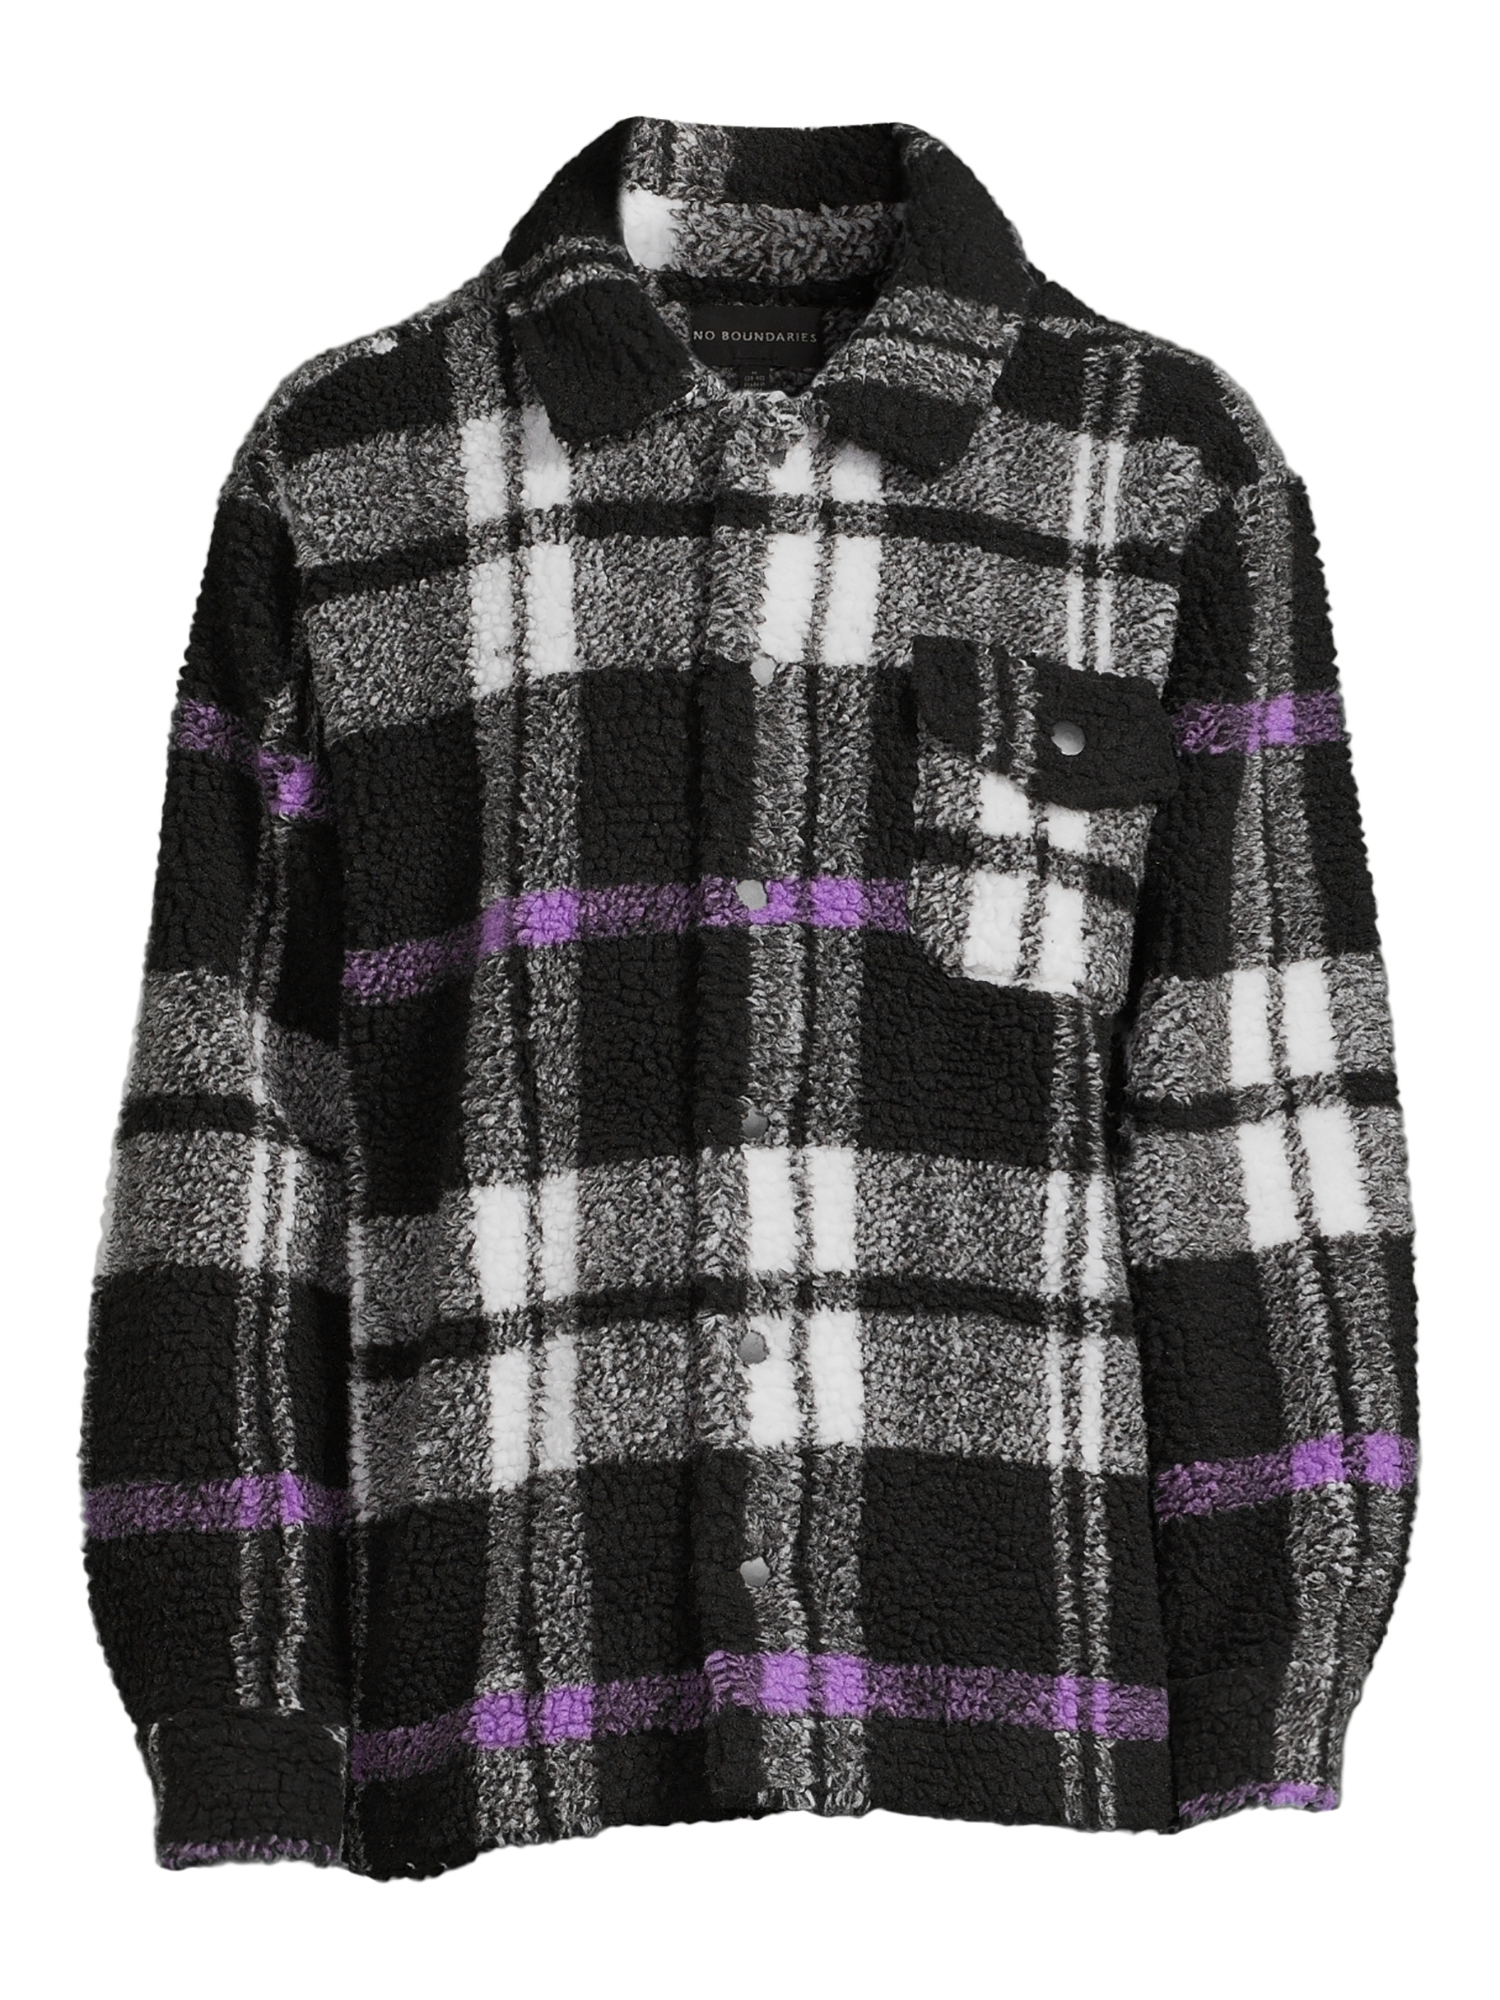 No Boundaries Men's and Big Men's Button-up Faux Sherpa Jacket, Sizes XS-3XL - image 5 of 5